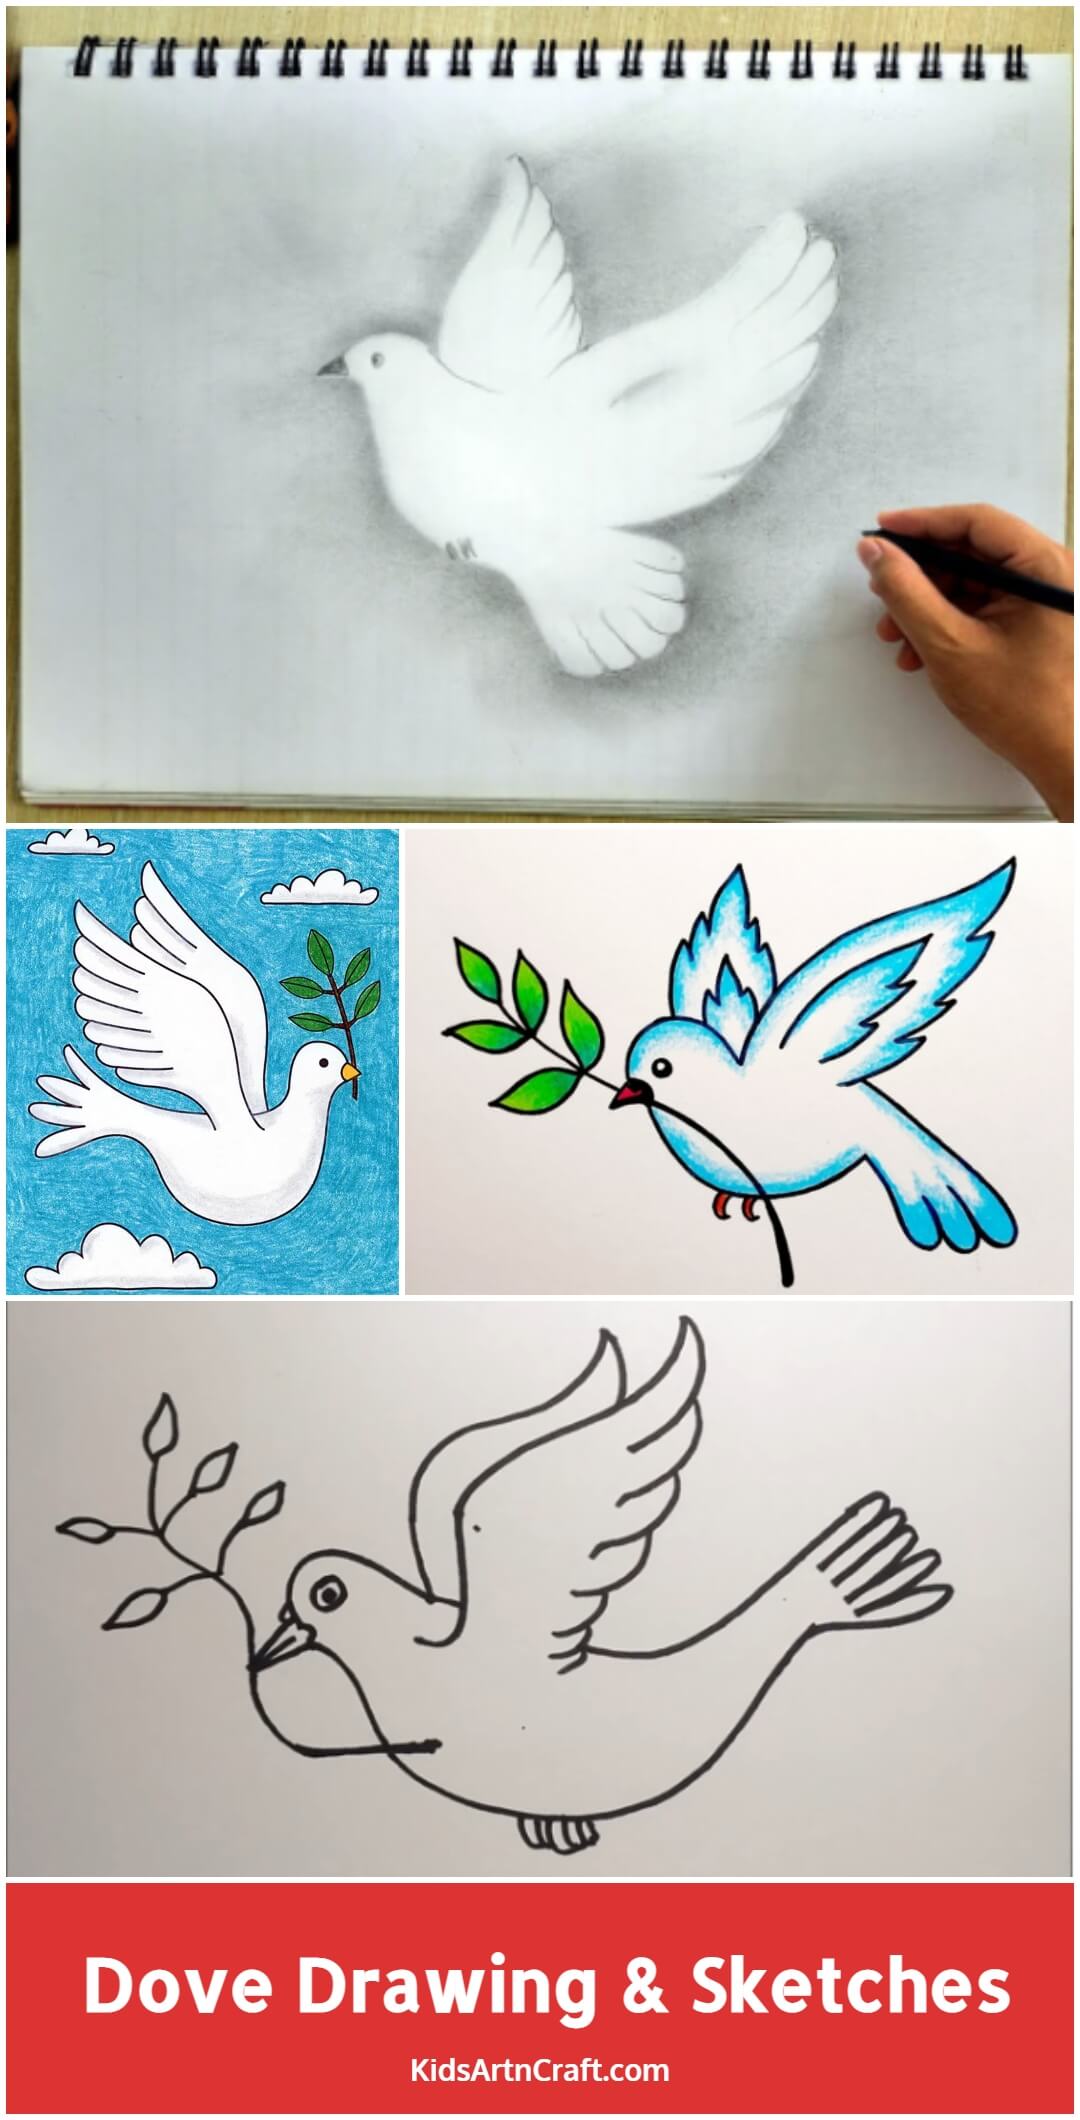 Dove Drawing & Sketches for Kids